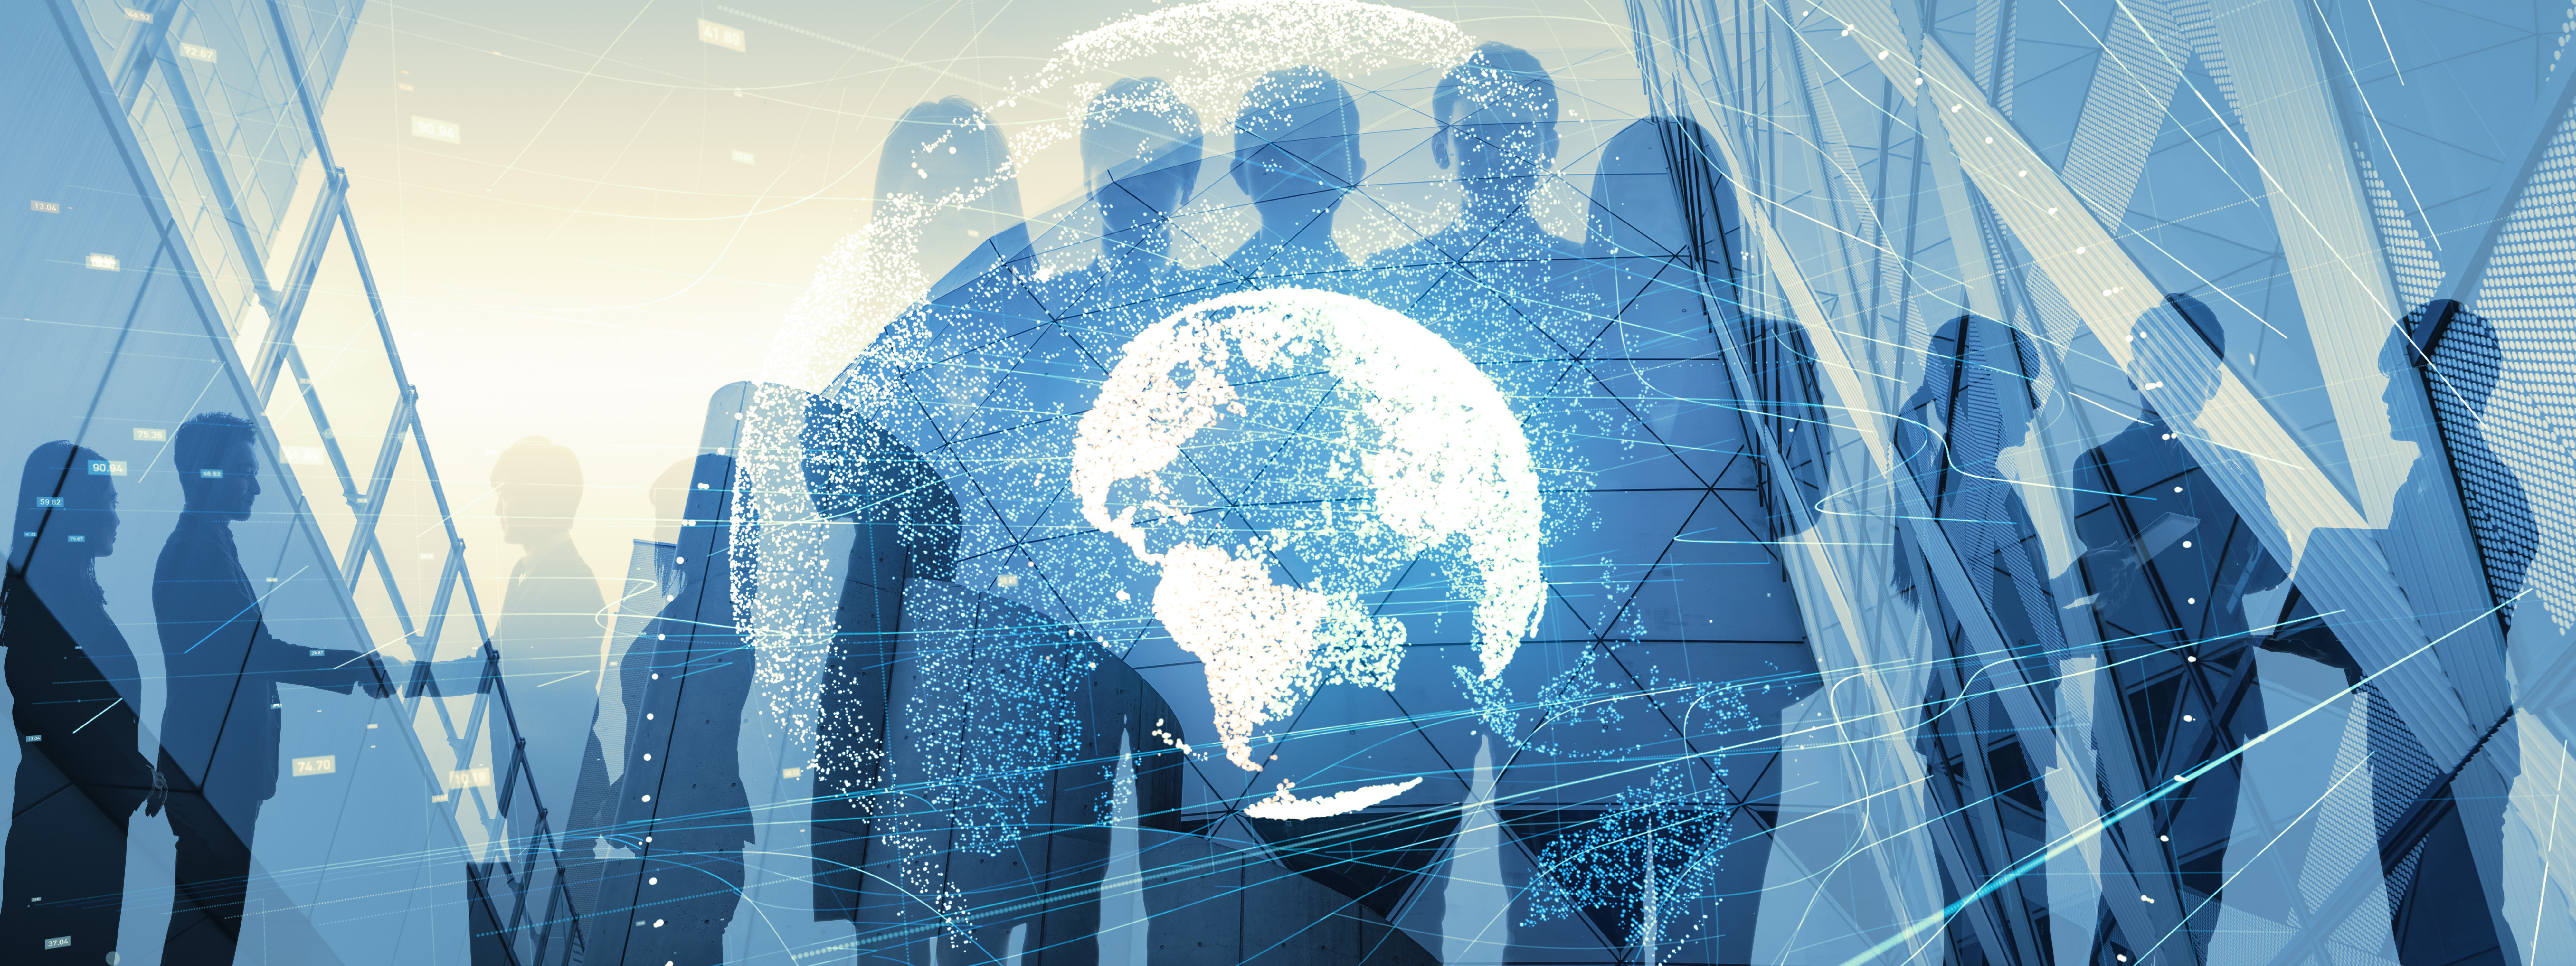 Global business concept showing silhouettes of people standing behind a globe overlaid with a mesh implying interconnectedness